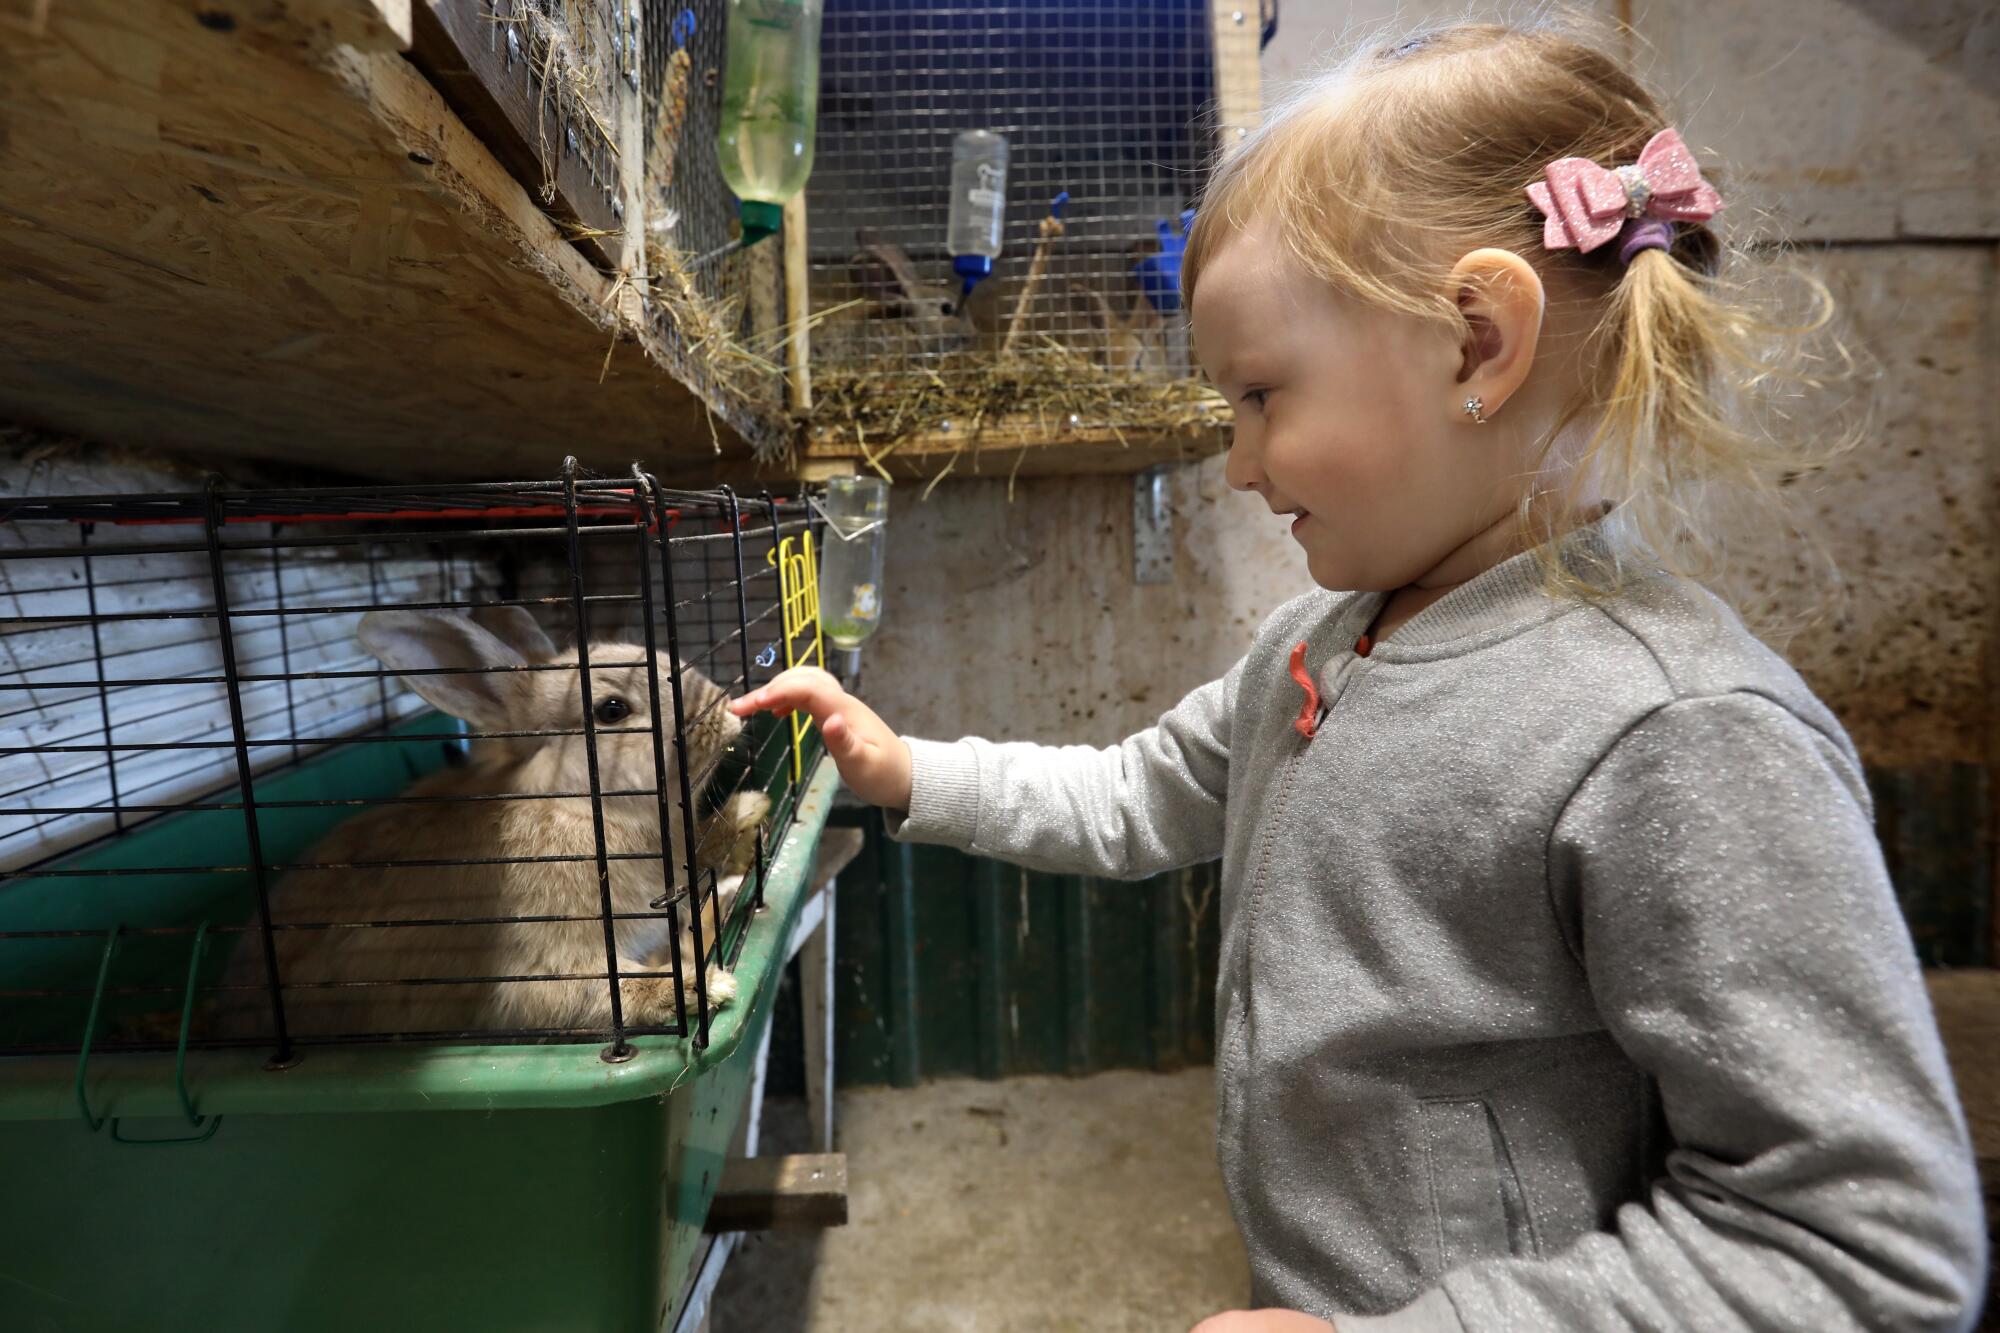 Girl reaching out to rabbit in a cage